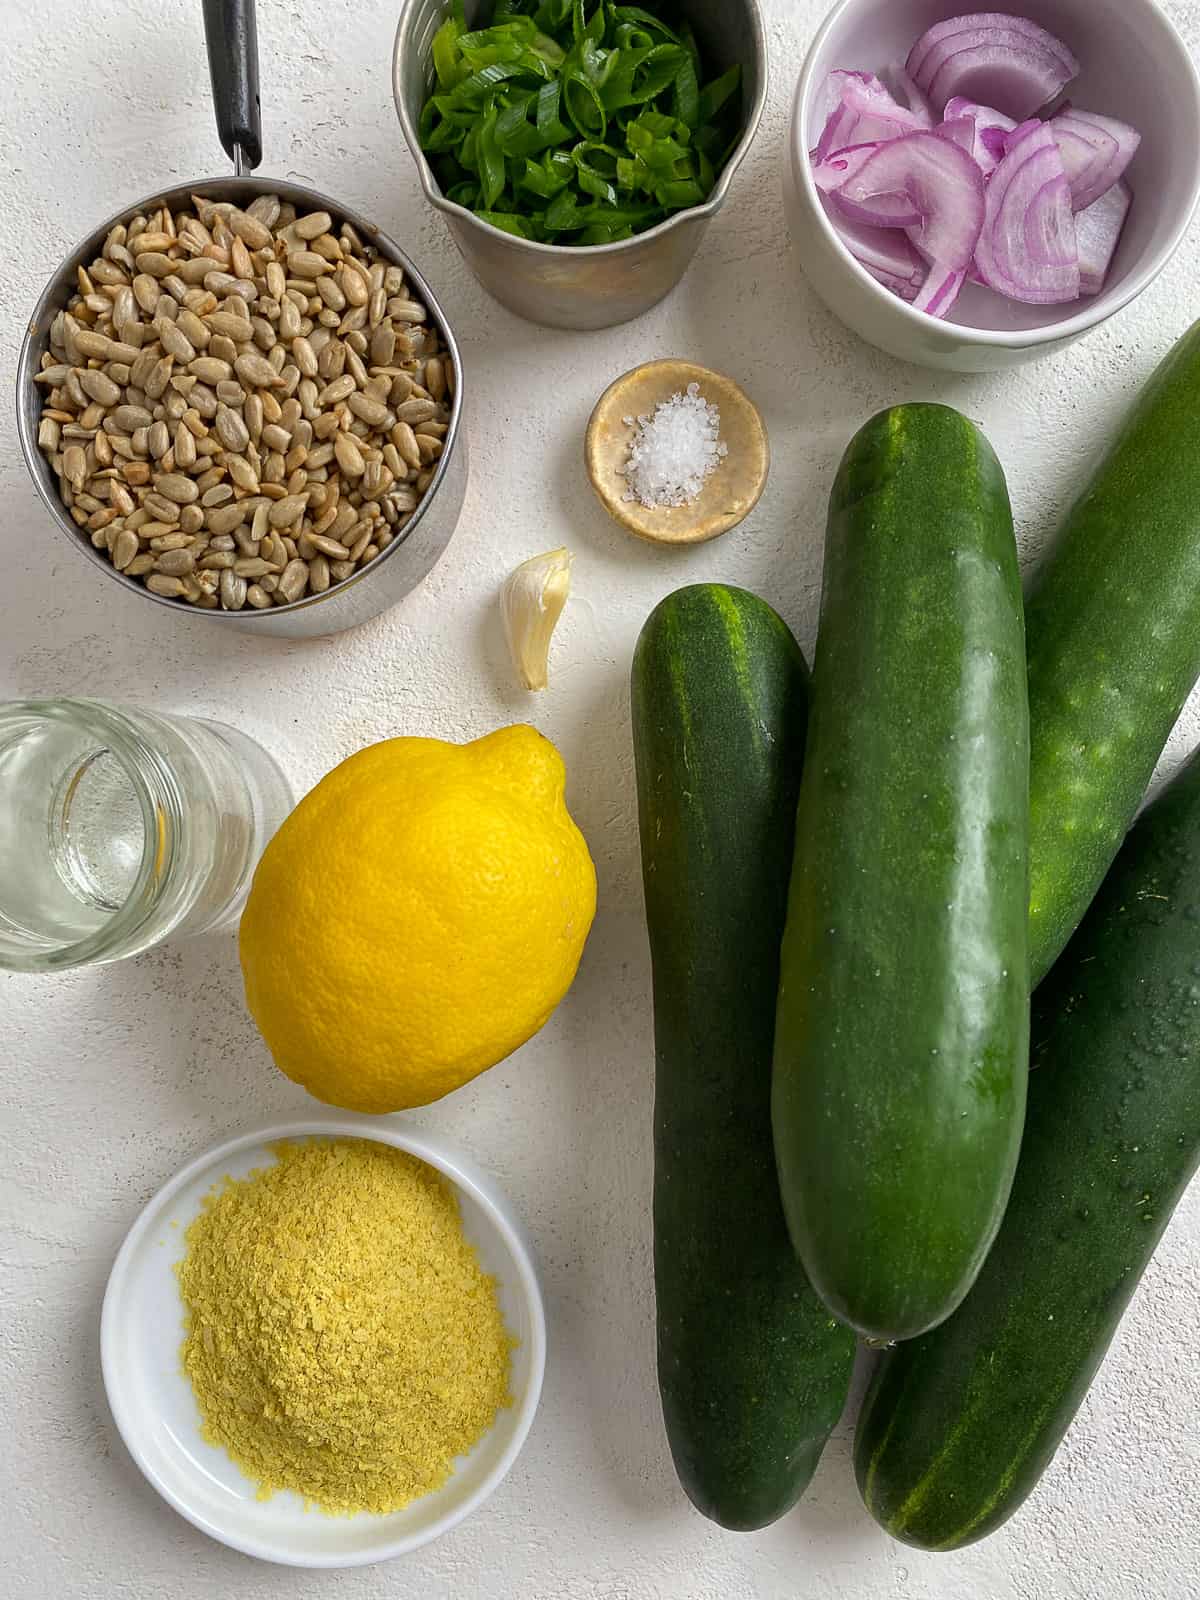 ingredients for Easy Cucumber Bites with Sunflower Chive Cream Cheese measured out against a light surface